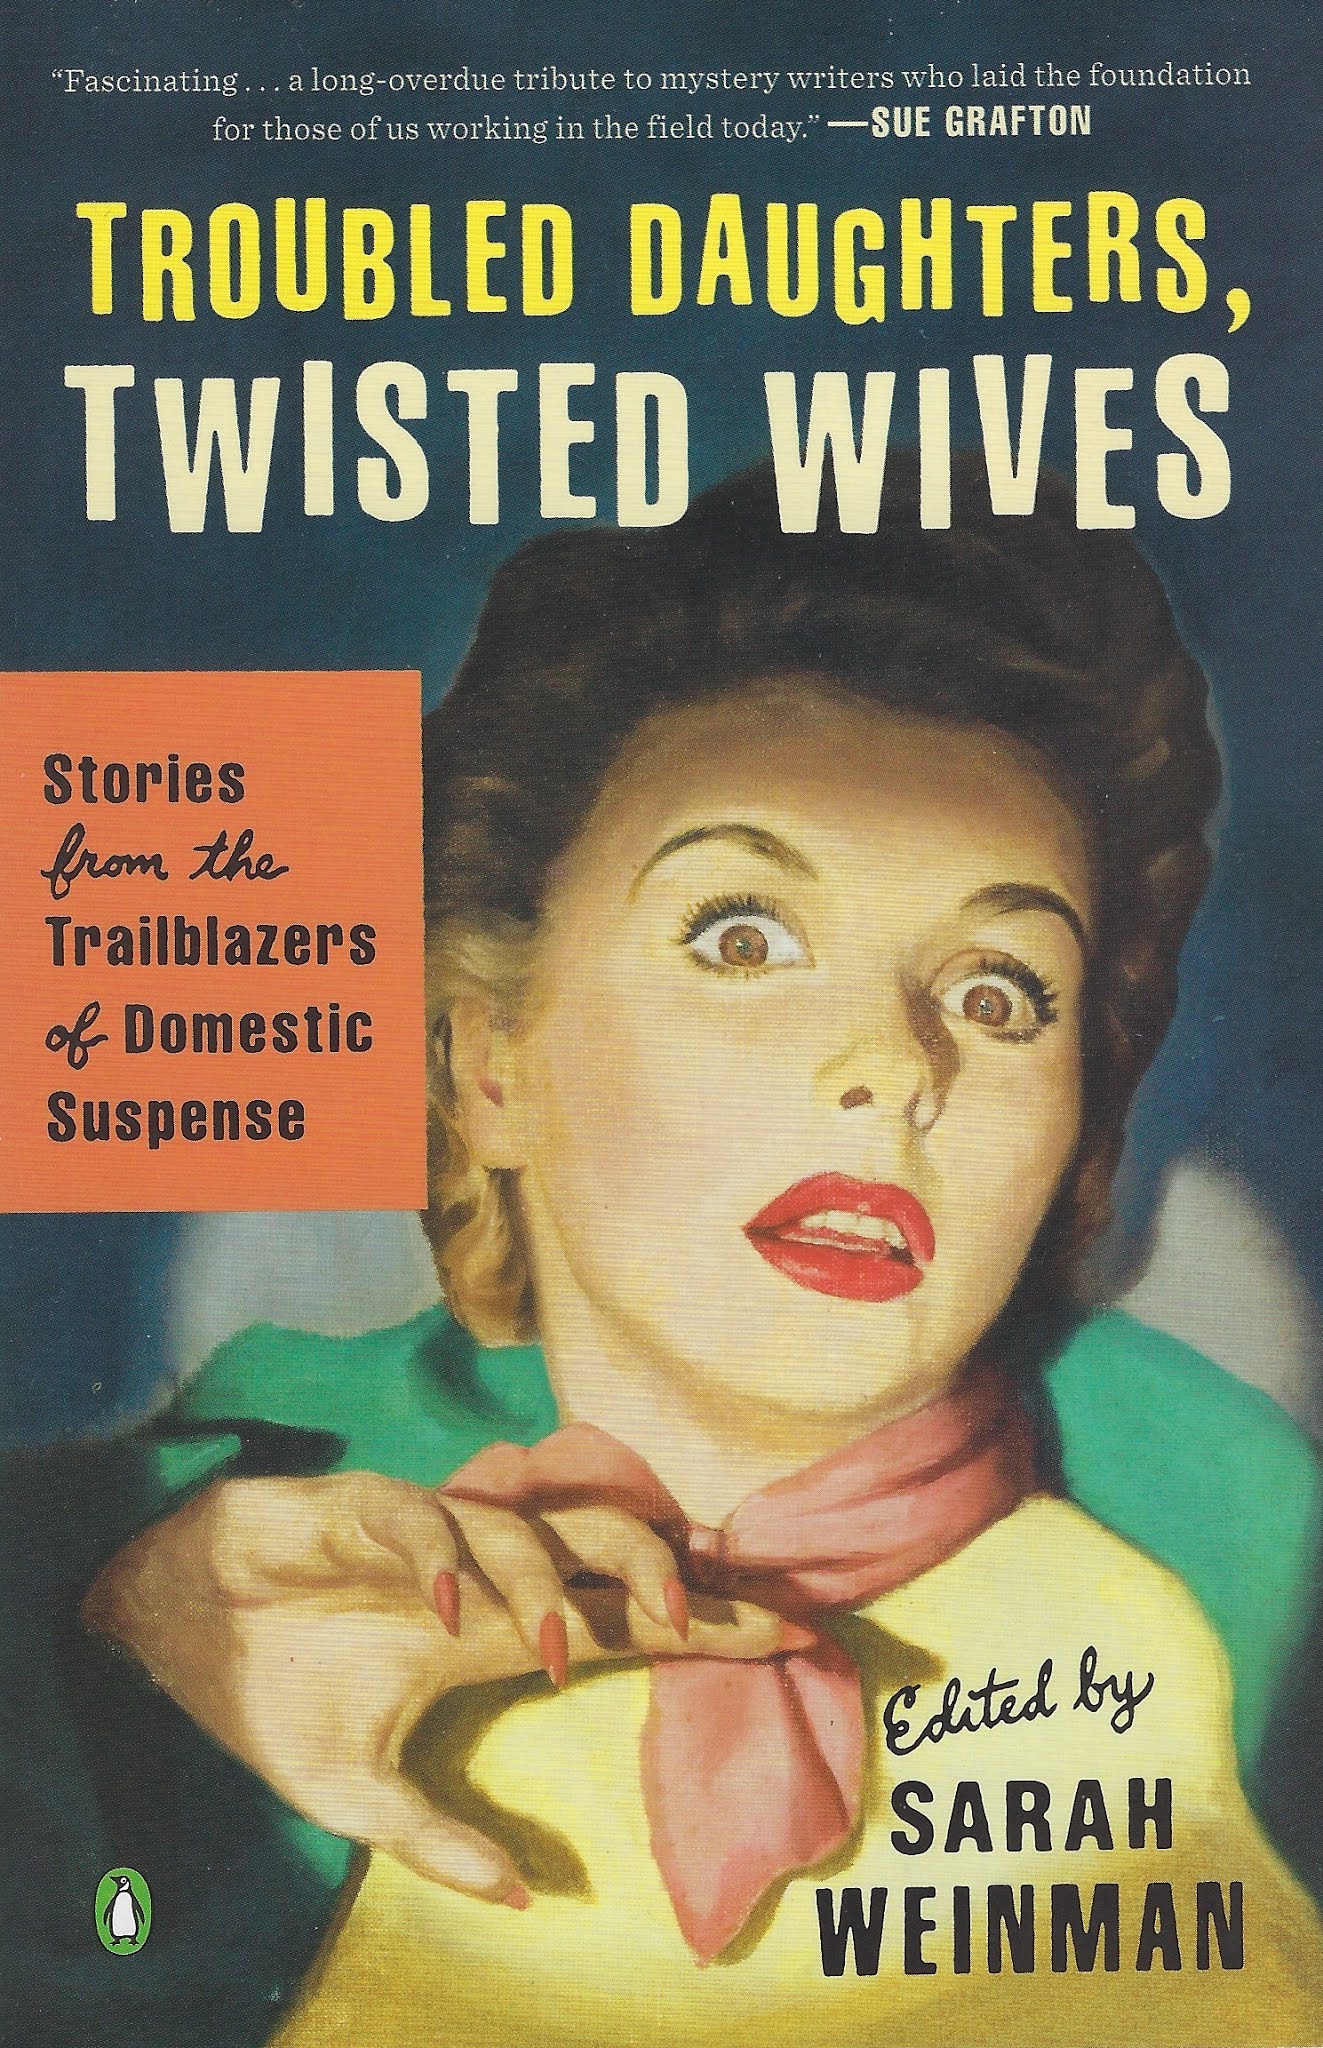 Wife рассказы. Twist wife. Readers wives stories Magazines.